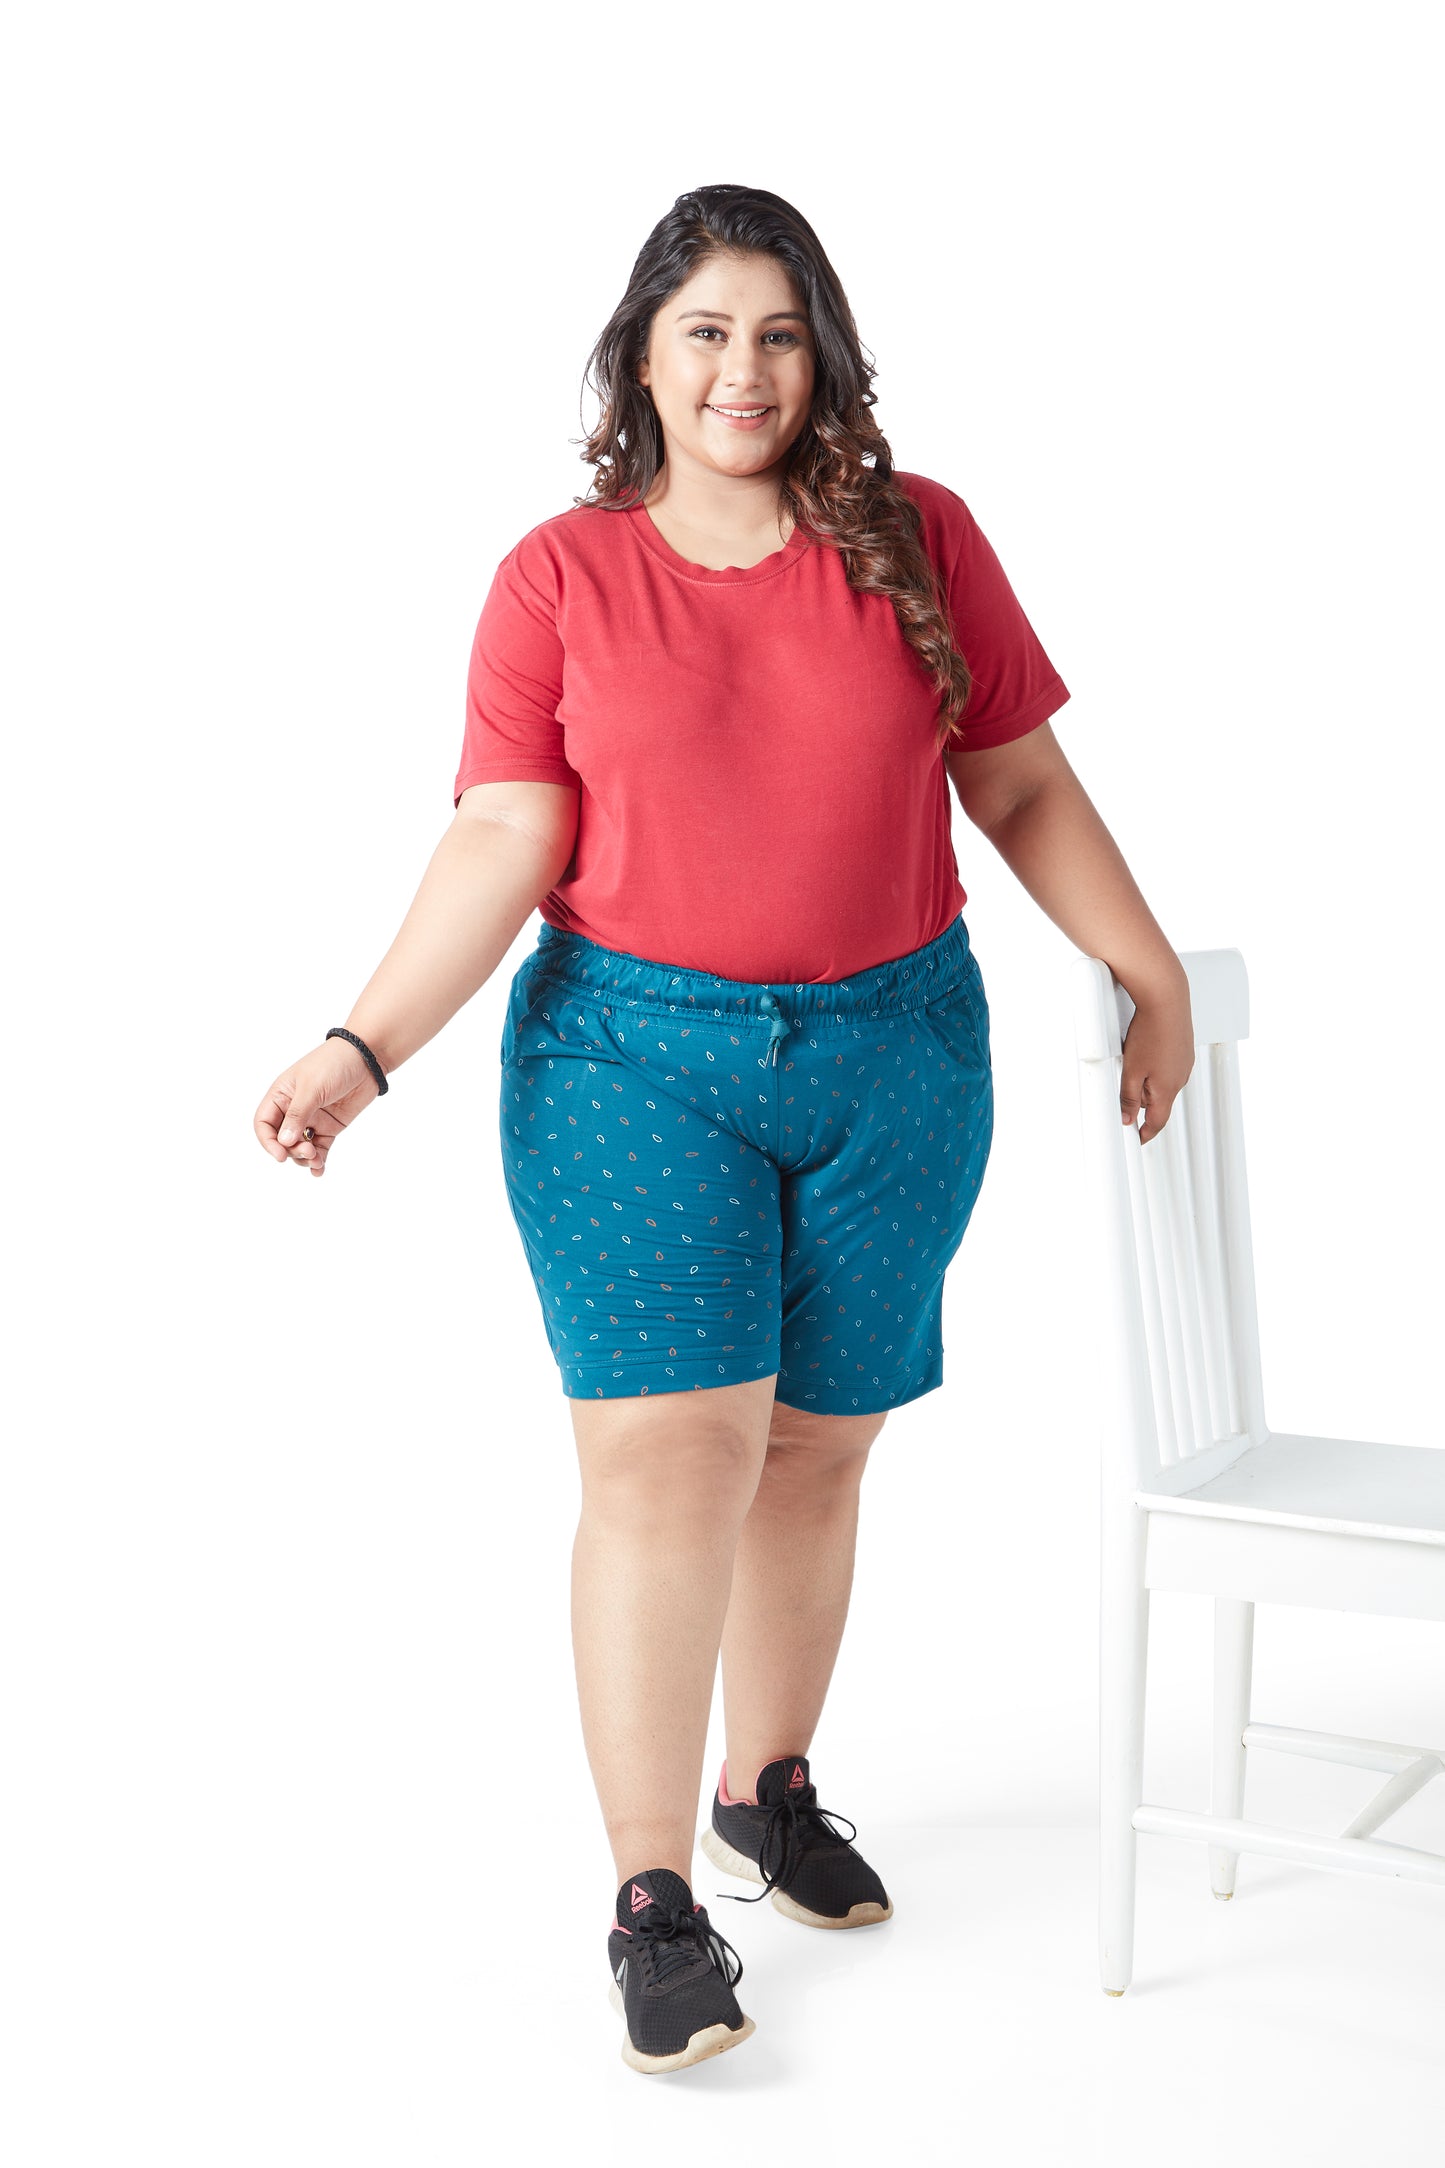 Plus Size Cotton Shorts For Women - Printed Bermuda - Teal Blue